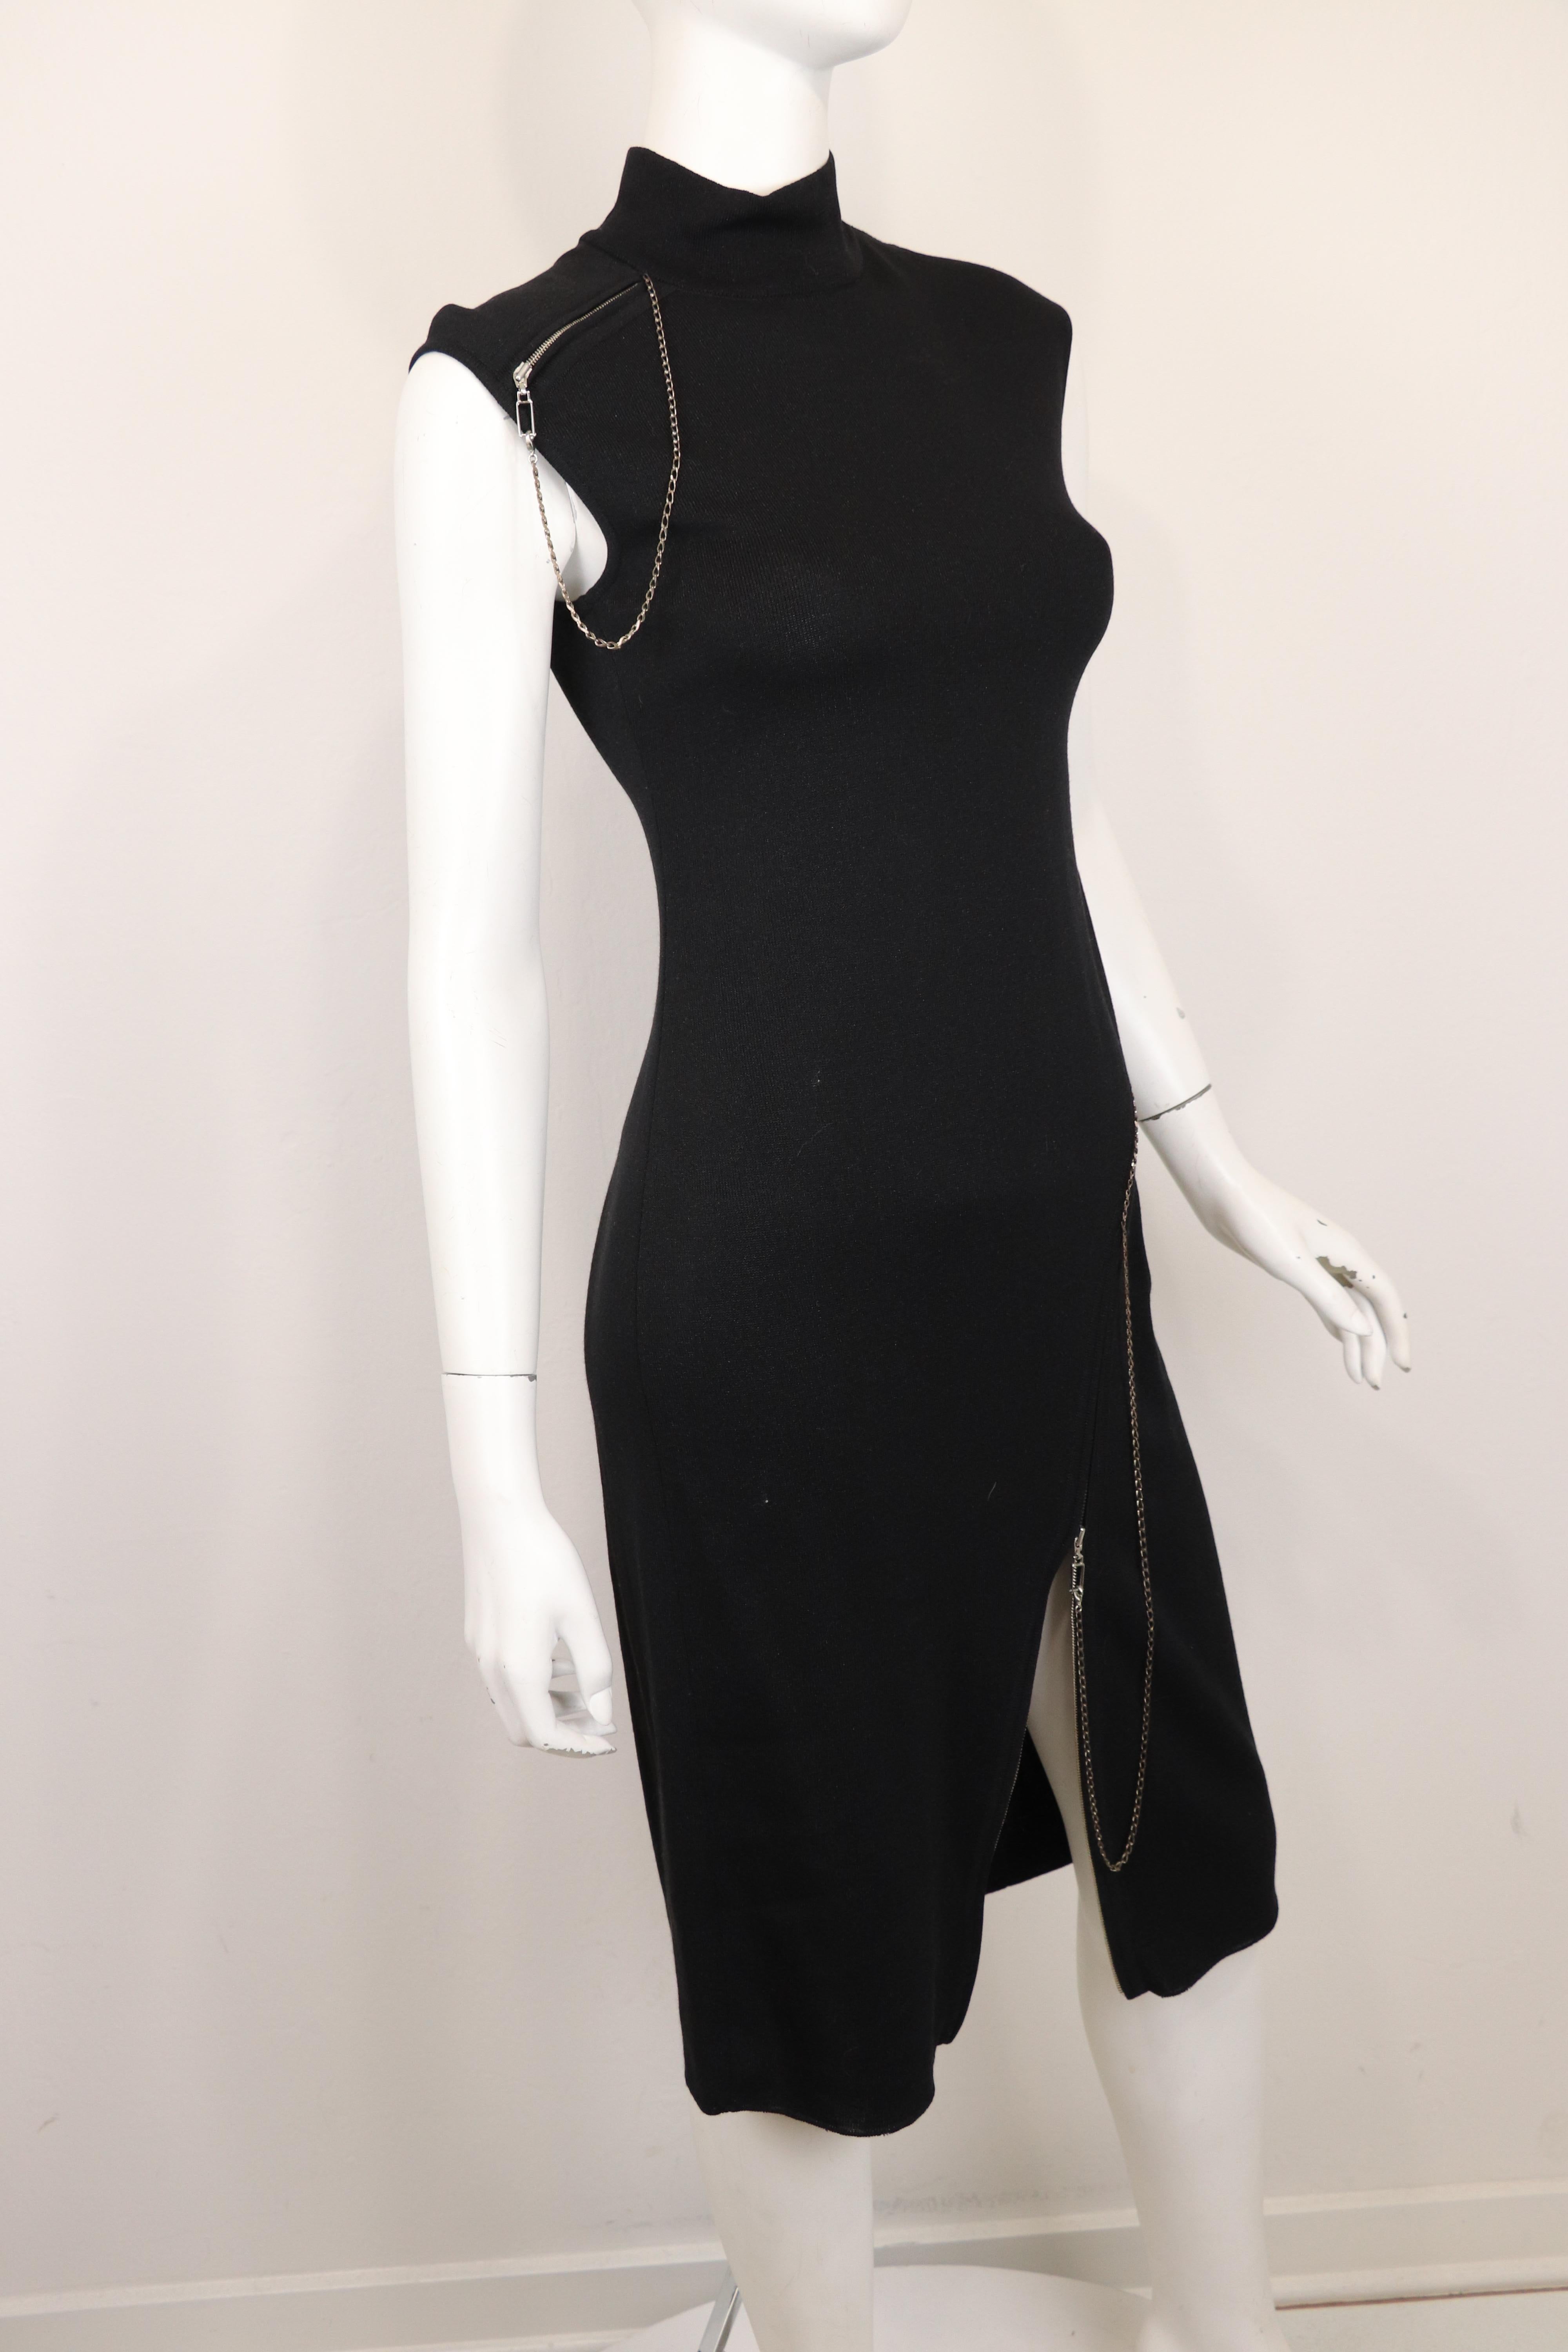 Bodycon dress by the notorious John Galliano, known for his avant- guard pieces, showcases a black knit sleeveless dress with zipper details at the left hip that extends to the right hemline, moving diagonally as a working zipper to expose the